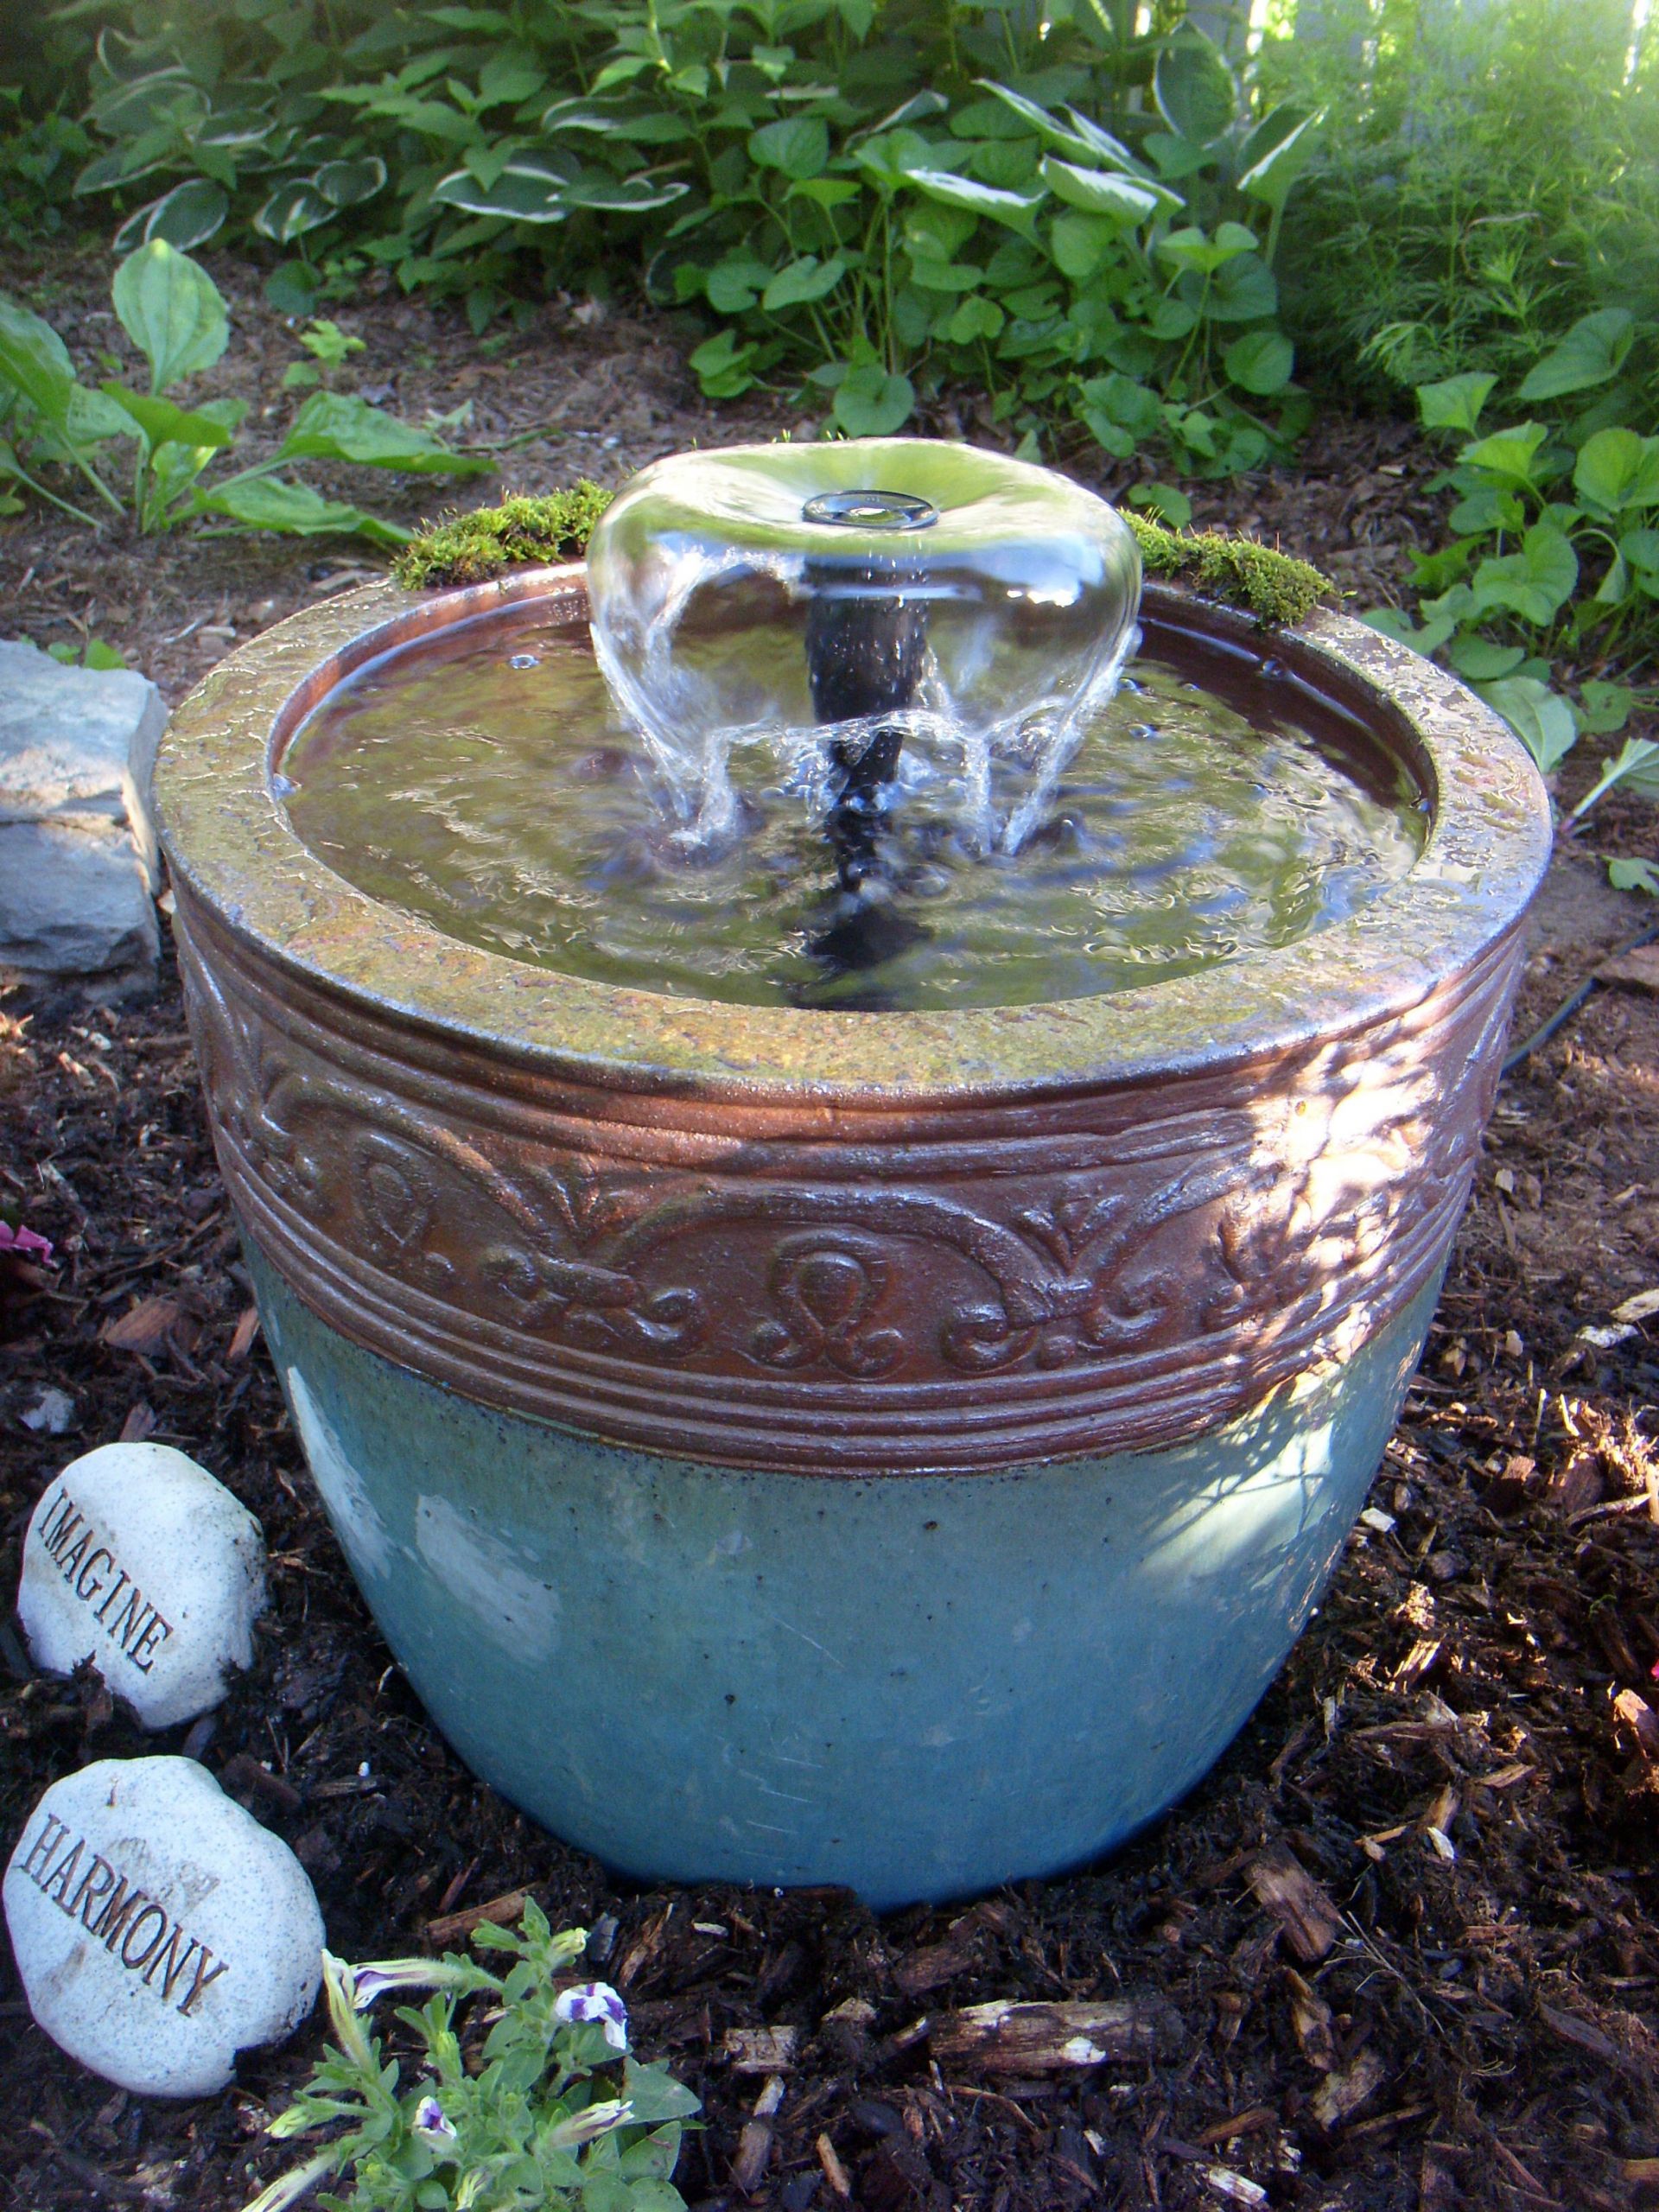 DIY Outdoor Water Fountain Kits
 DIY flower pot fountain $20 pump kit from Lowes $16 pot